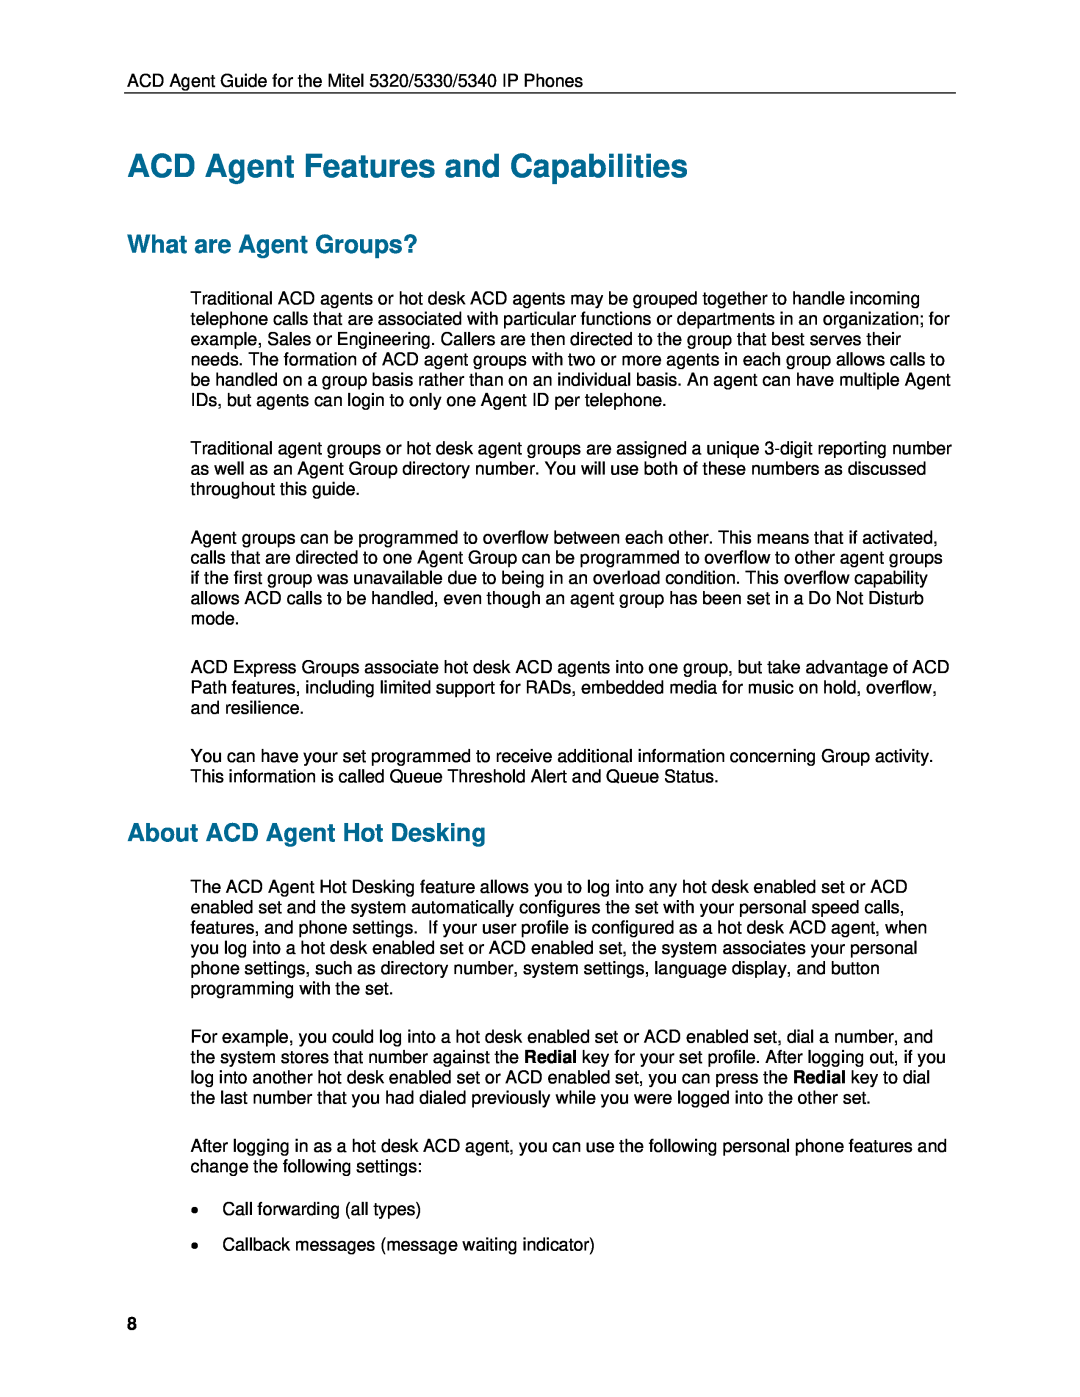 Mitel 5340, 5320, 5330 manual ACD Agent Features and Capabilities, What are Agent Groups?, About ACD Agent Hot Desking 